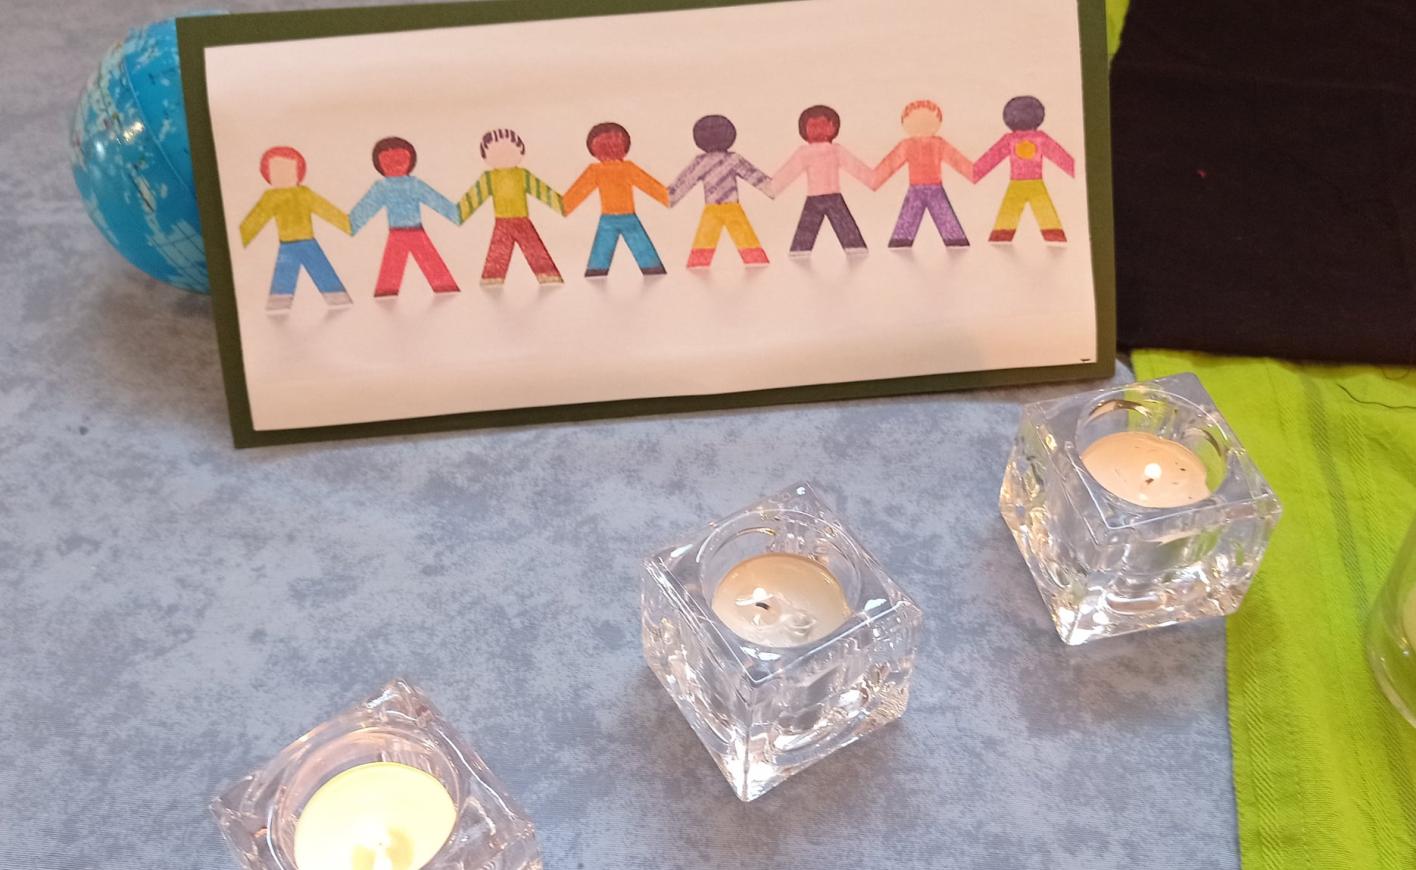 drawing of people holding hands and tea light candles around